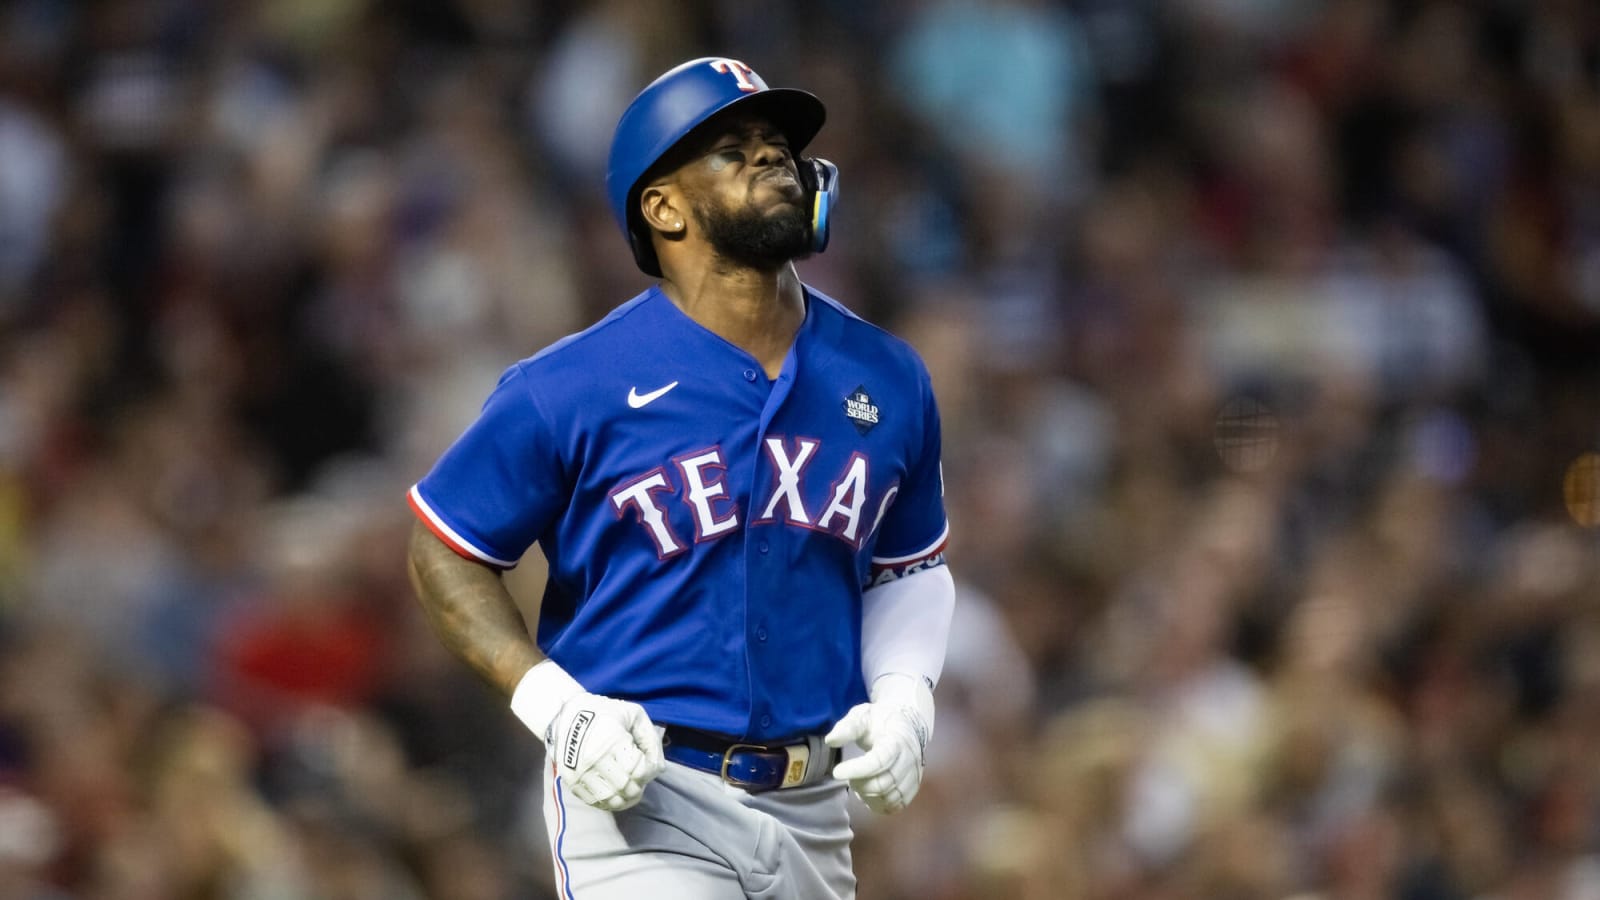 Adolis Garcia left off Rangers’ Game 4 starting lineup with left-side tightness